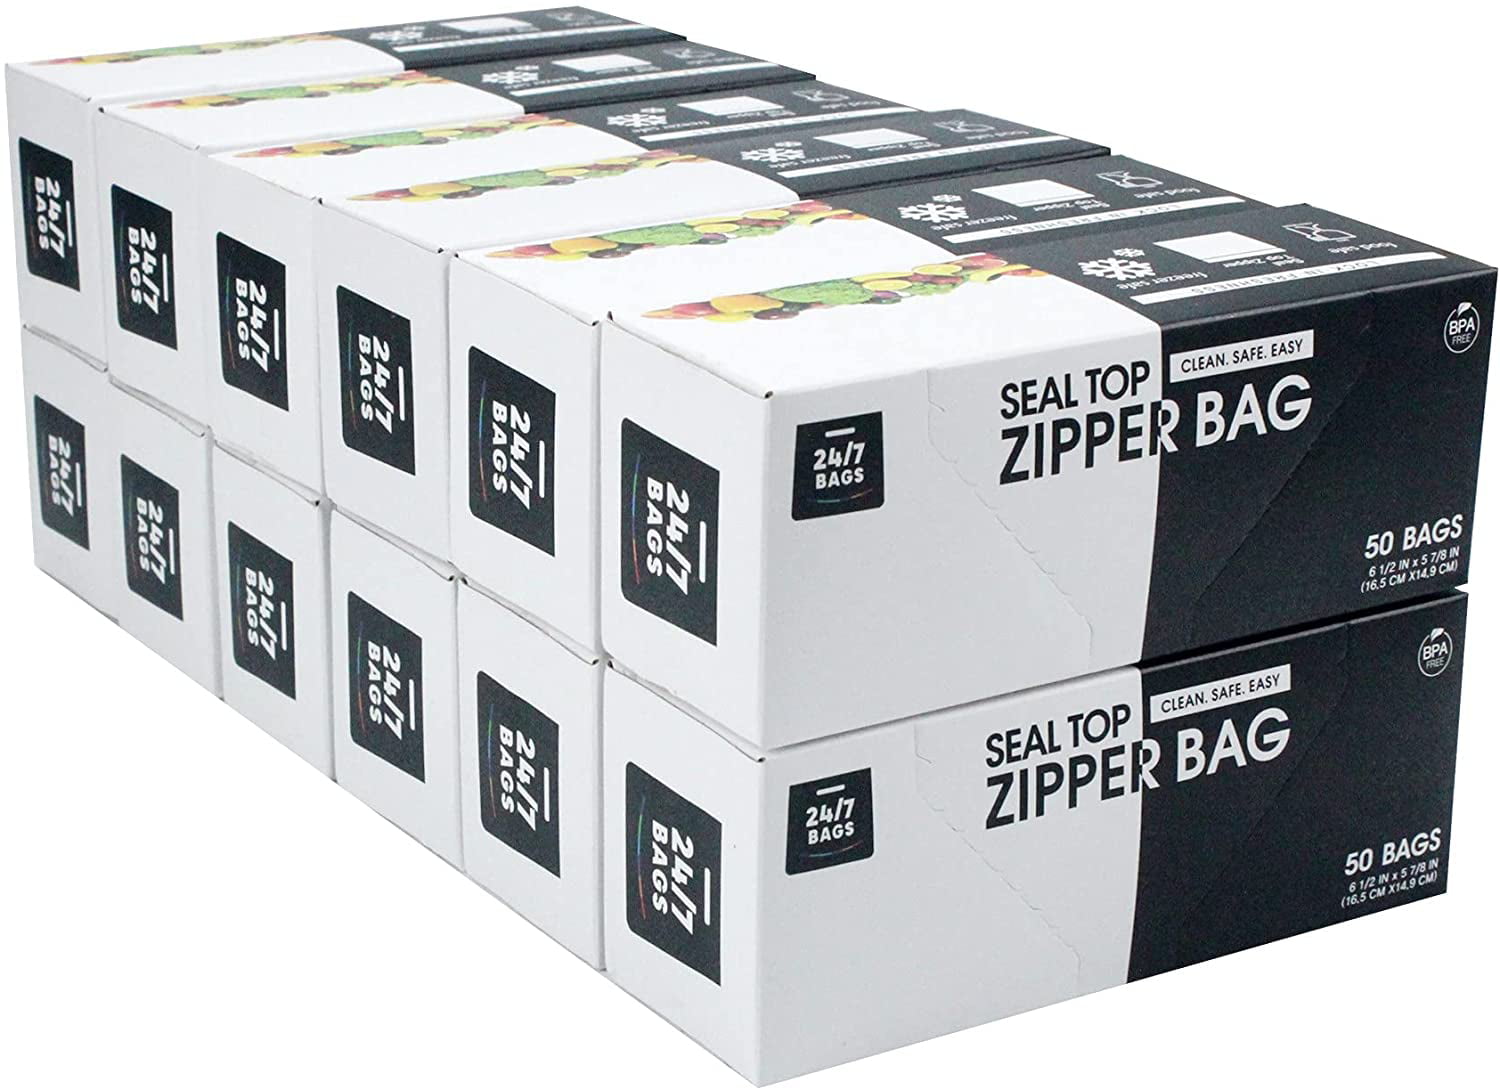 24/7 Bags - Double Zipper Storage Bags, Variety Pack, 4 Sizes, 275 Count, Size: Double Zipper Seal Top - Variety 275 Bags, Clear